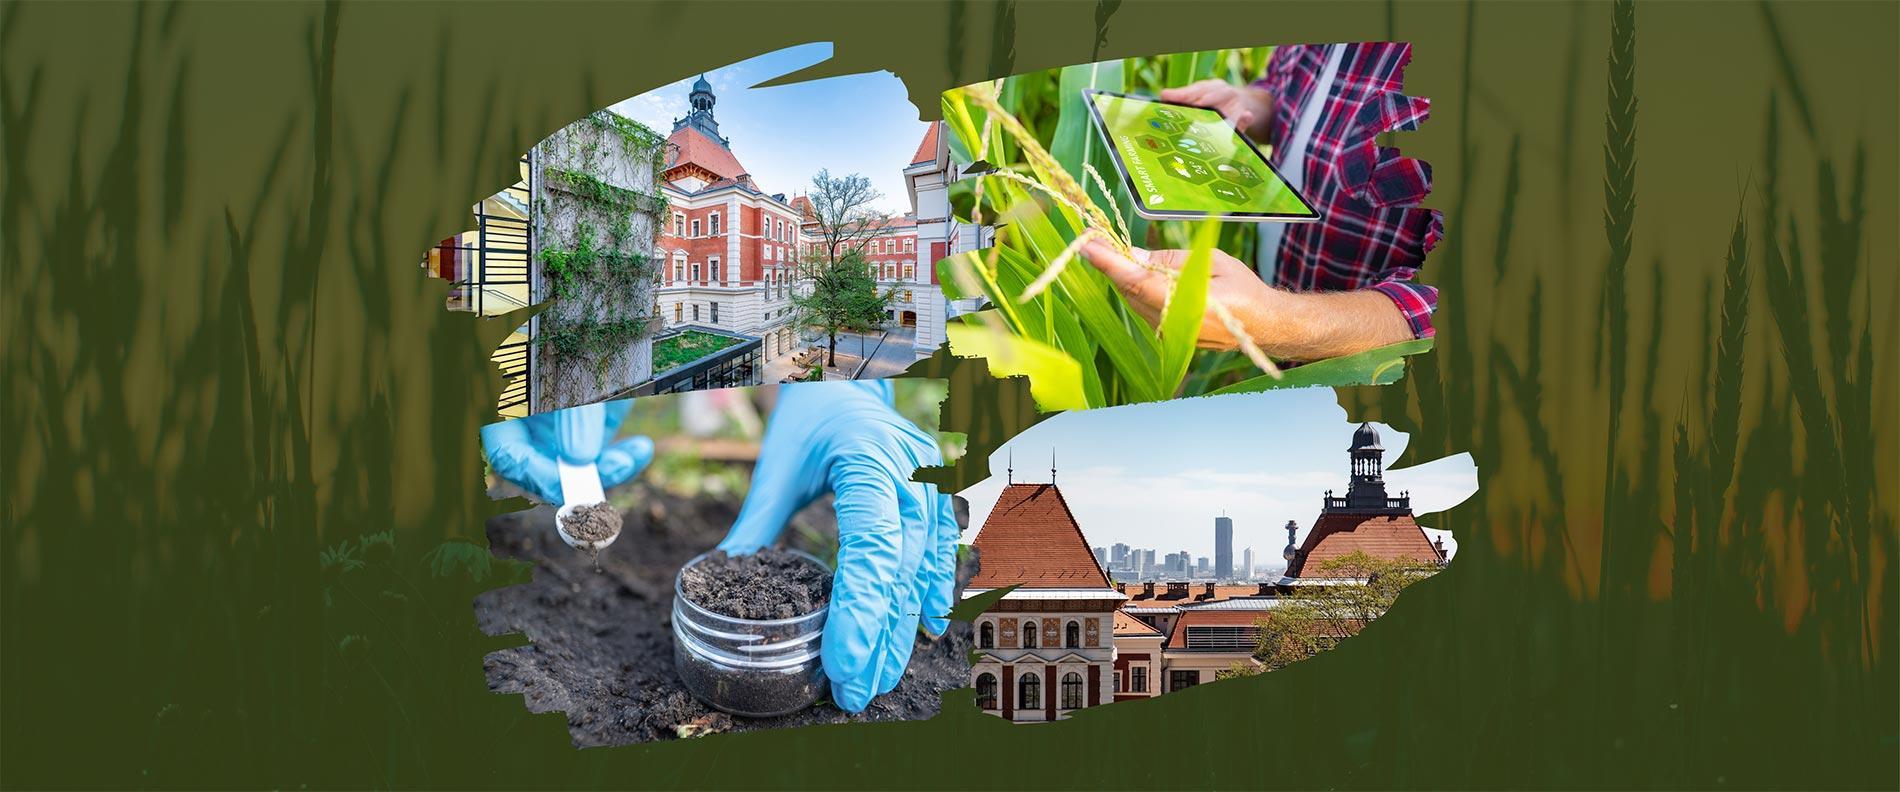 150th Anniversary of BOKU – Austria’s University of Natural Resources and Life Sciences